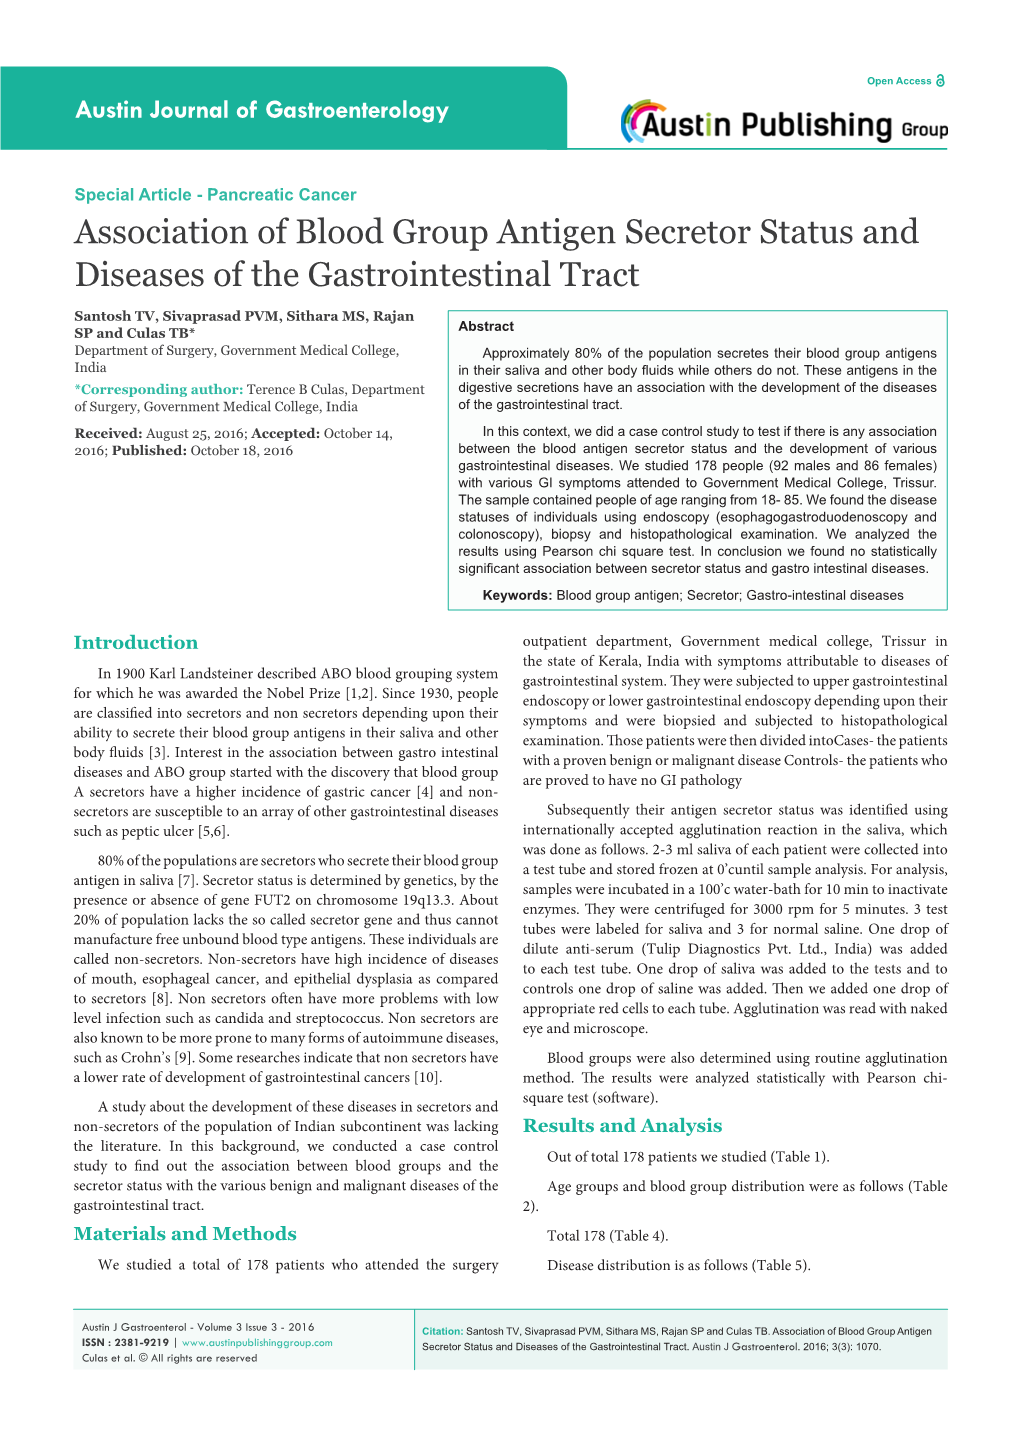 Association of Blood Group Antigen Secretor Status and Diseases of the Gastrointestinal Tract